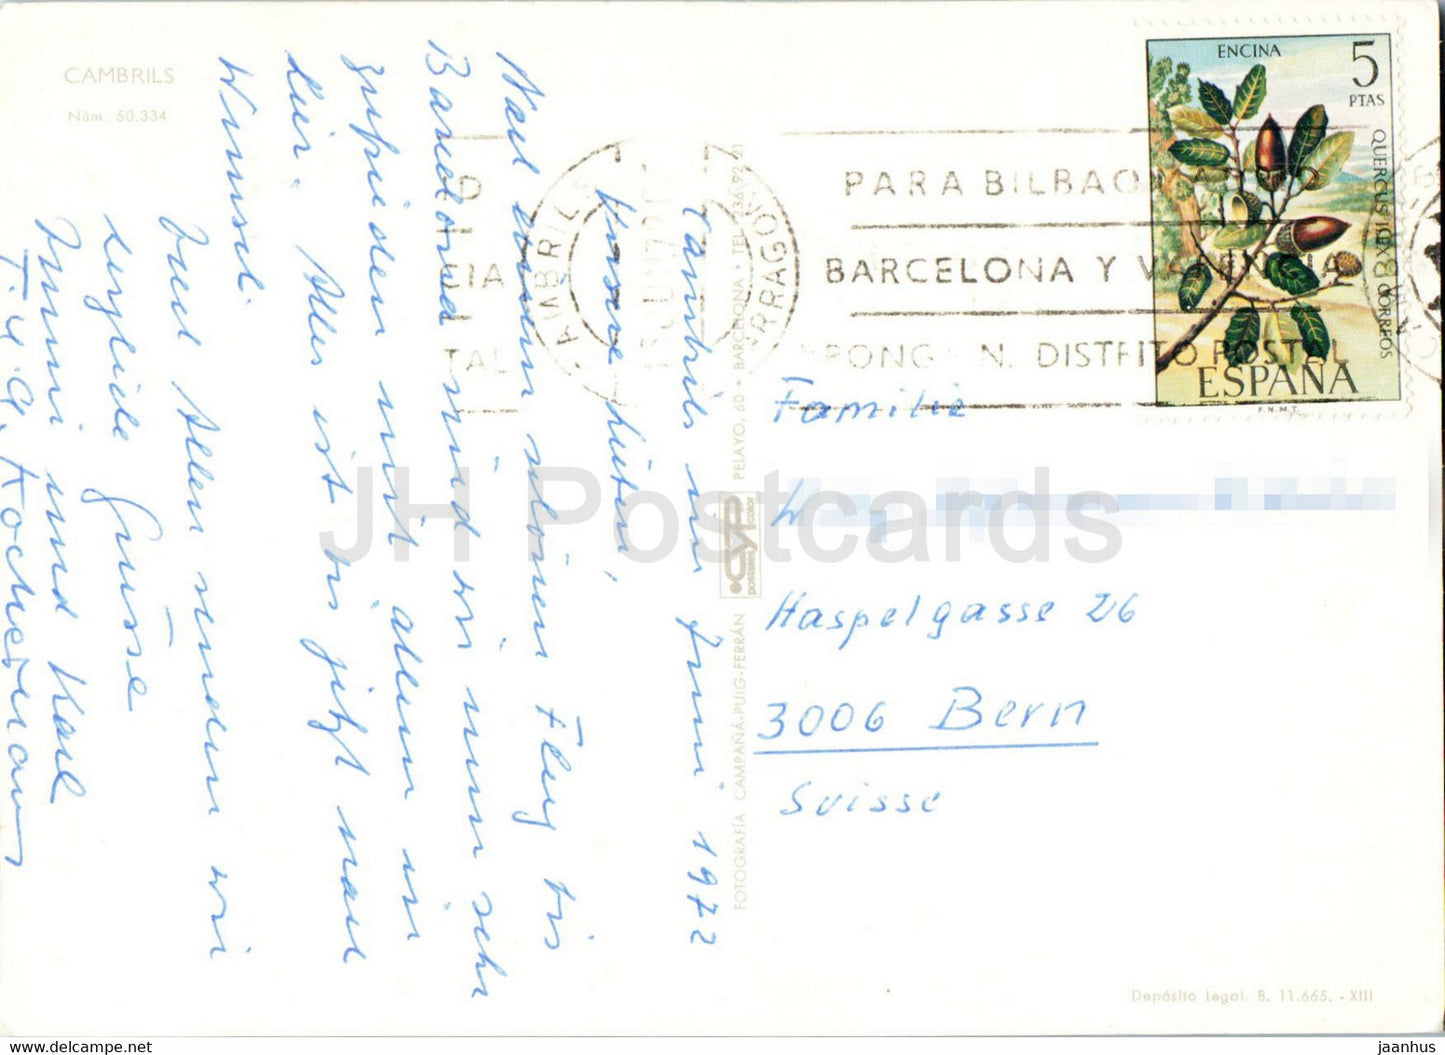 Cambrils - boat - ship - port - 50334 - 1972 - Spain - used